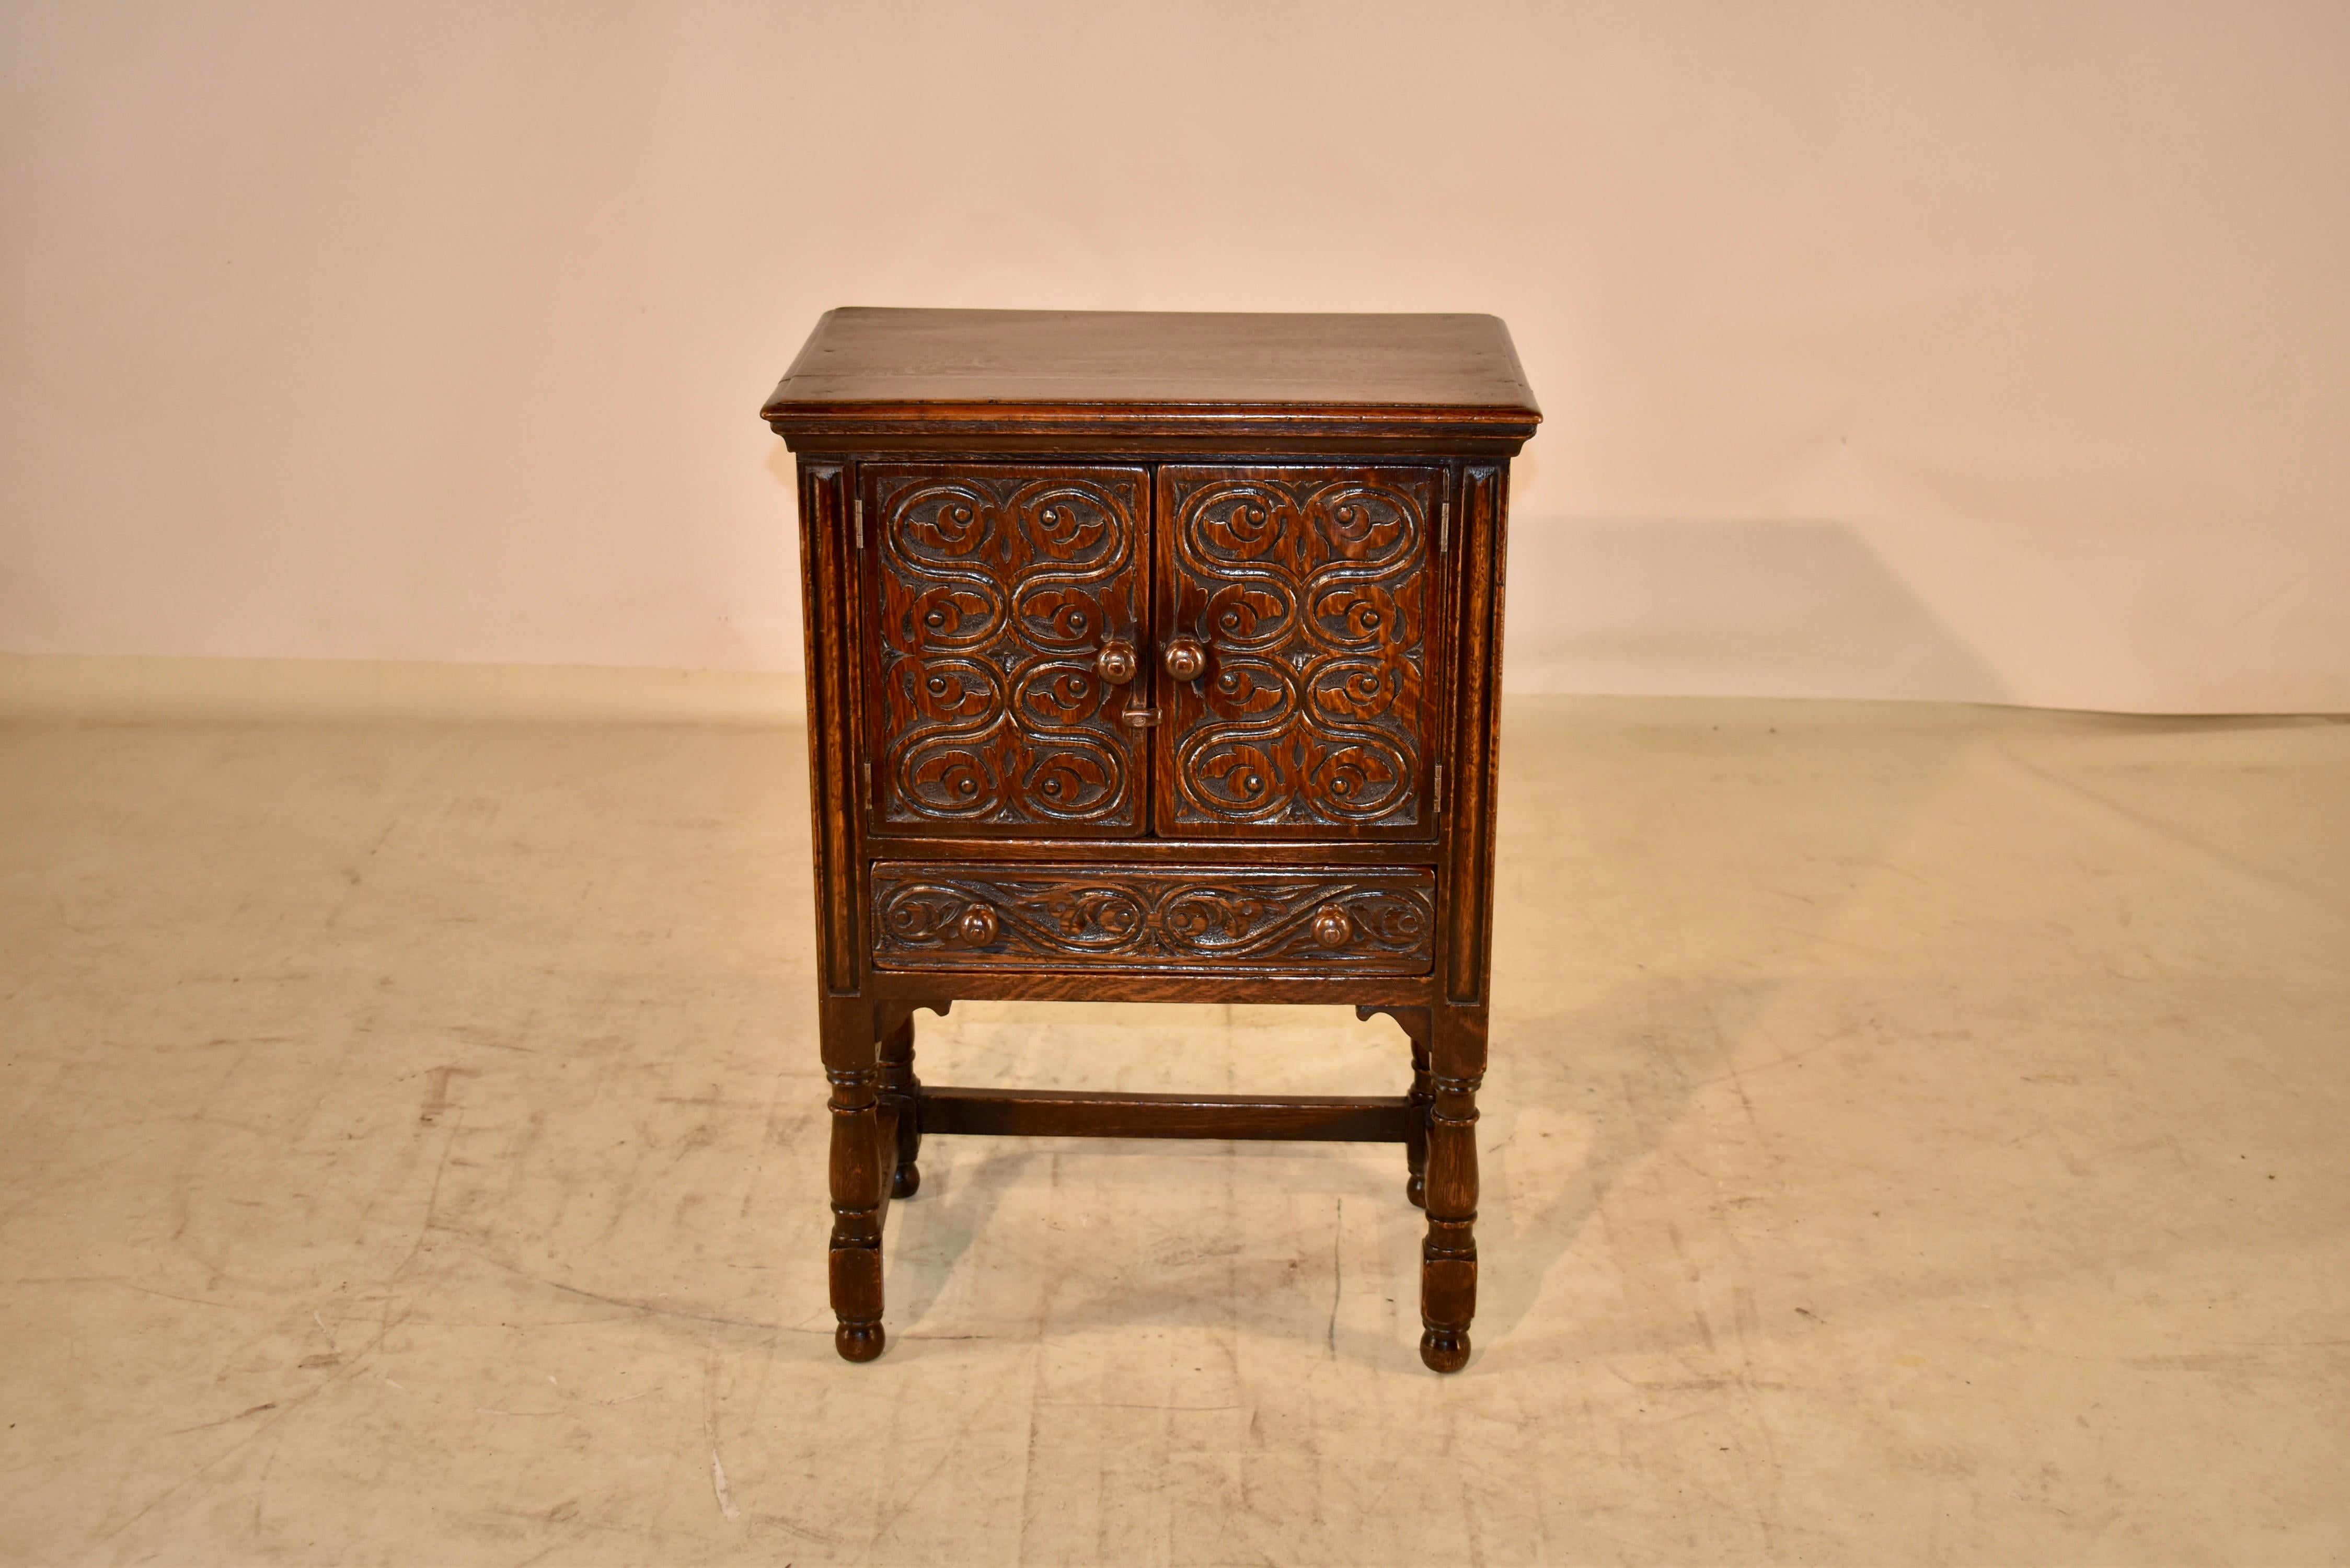 Late 19th century oak side table from England. The table is in the form of a small cupboard, which would be excellent for storage beside a chair or sofa. The top has a beveled edge, following down to paneled sides and two doors in the front, both of